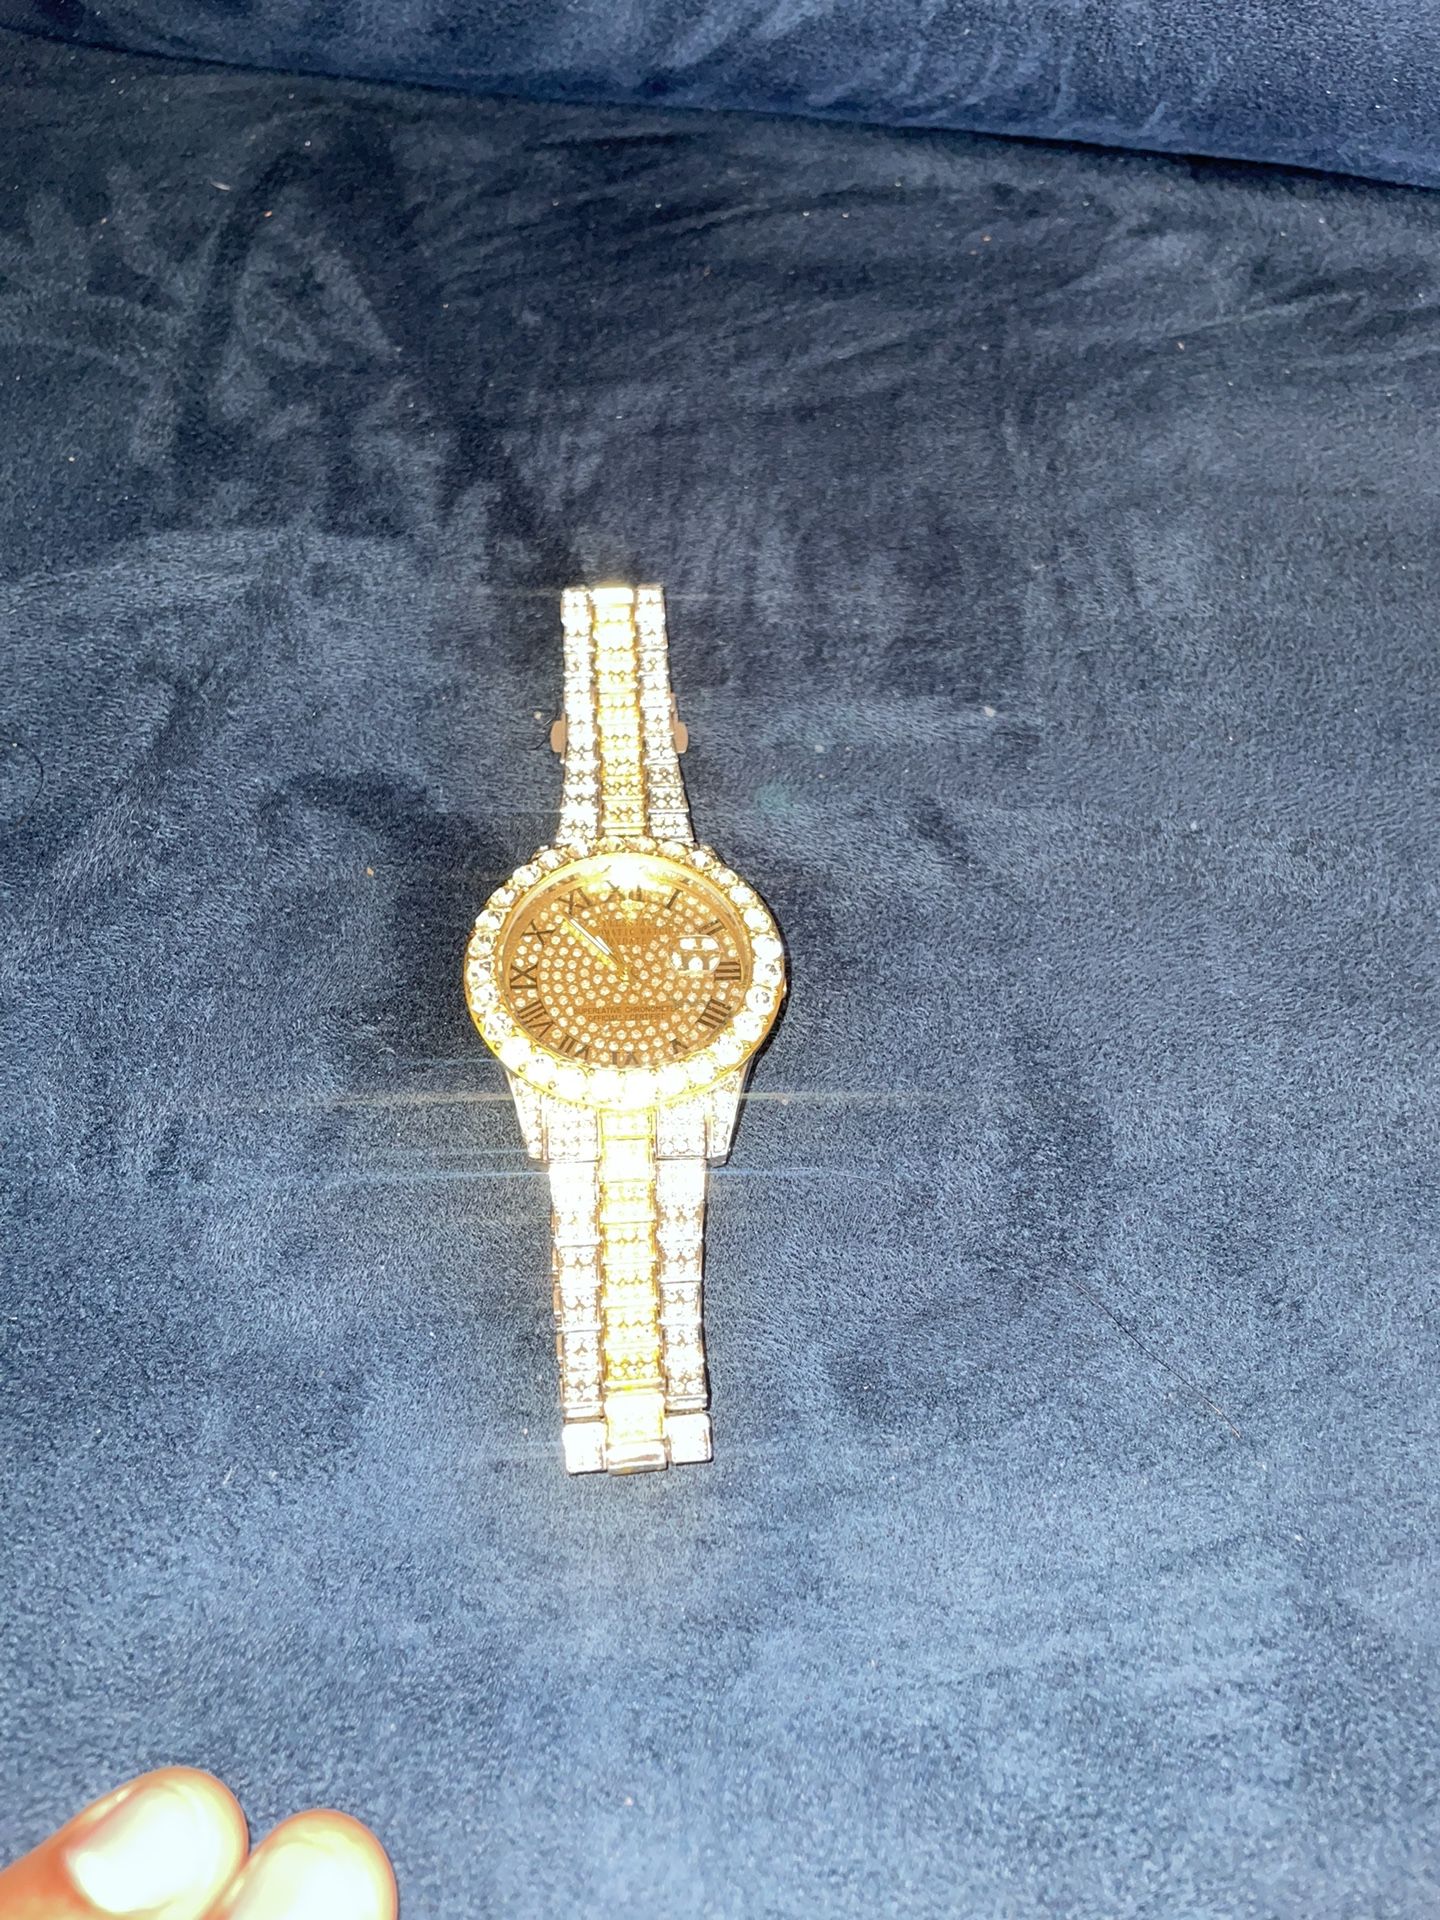 Platinum and Gold Watch For Sale Iced Out